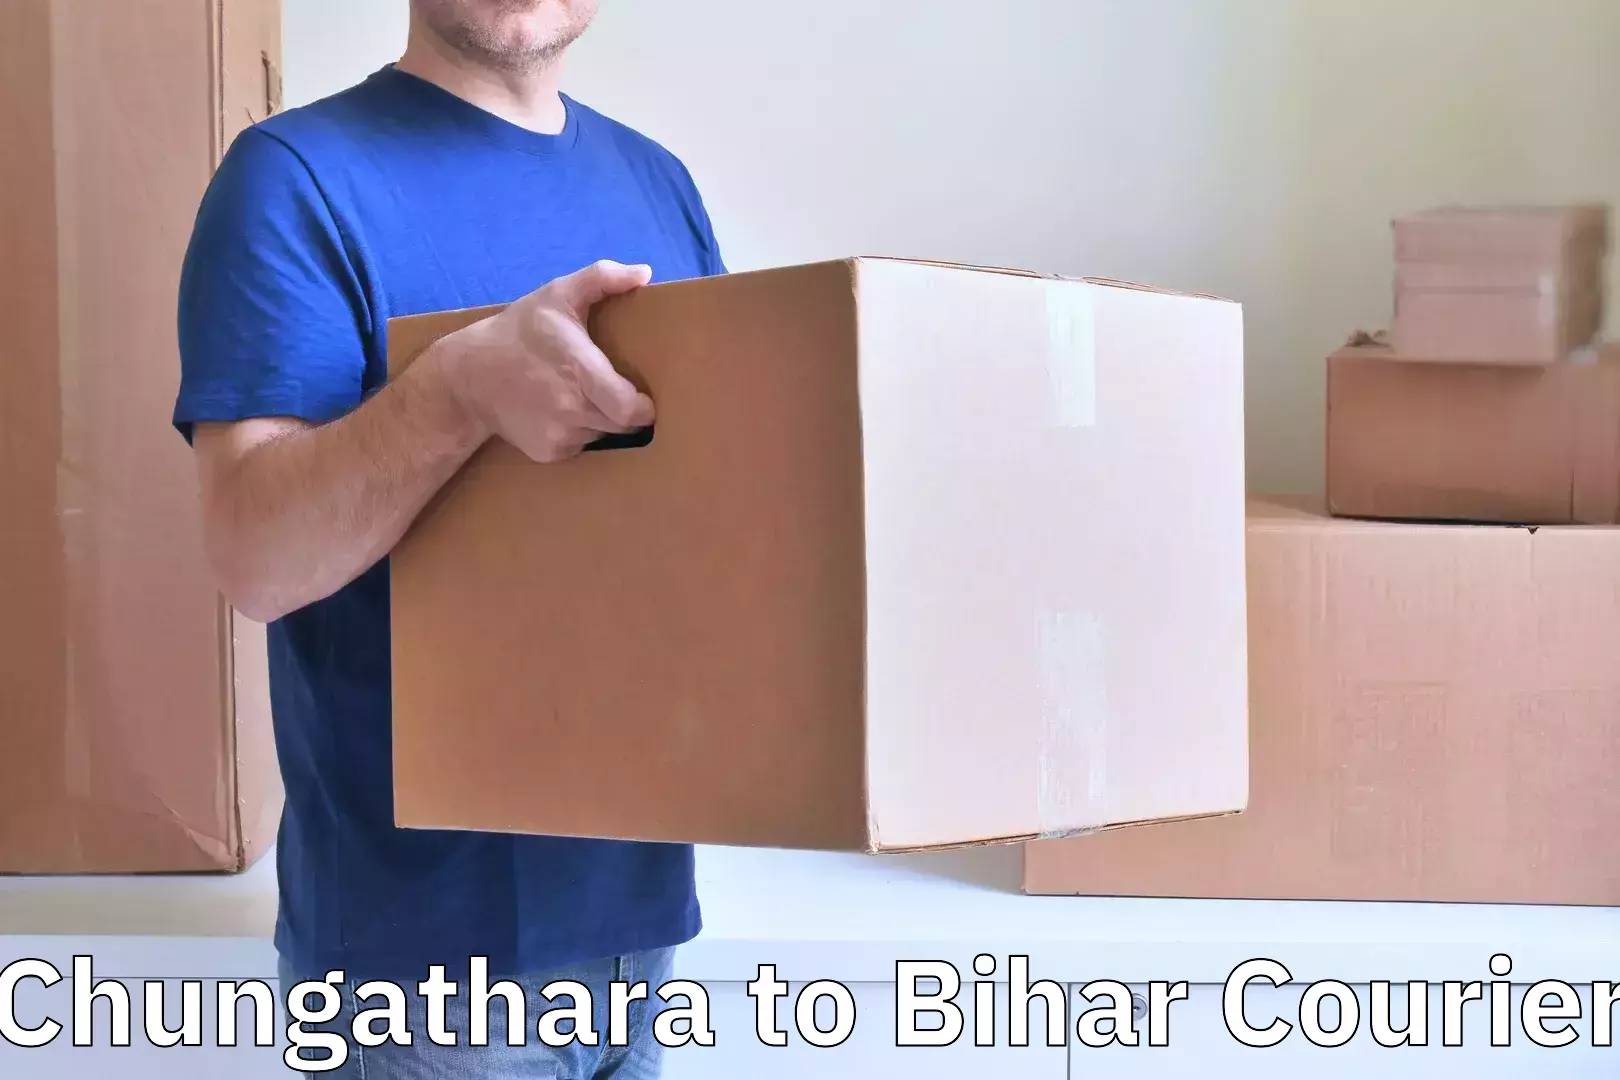 Luggage delivery providers Chungathara to Bihar